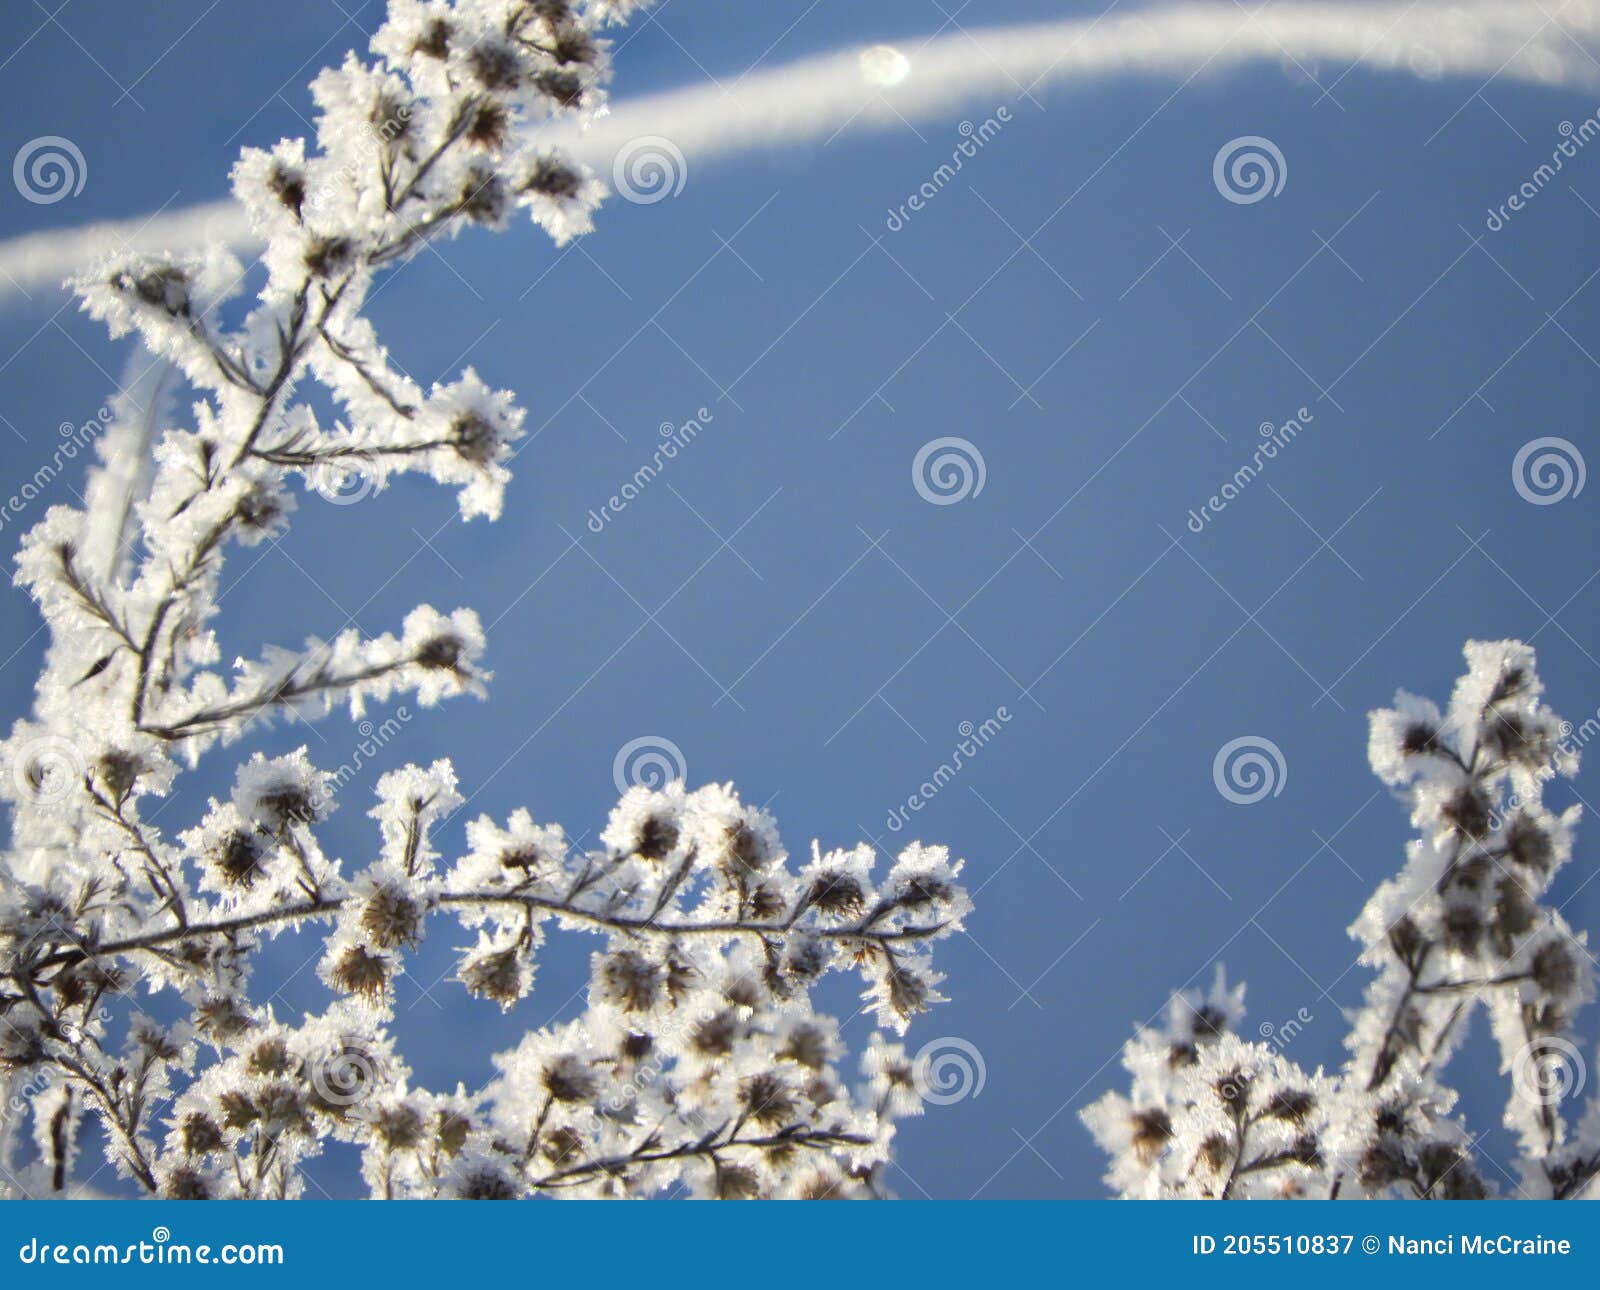 Winter Hoarfrost Covers Wildflowers with White Crystals Stock Image ...